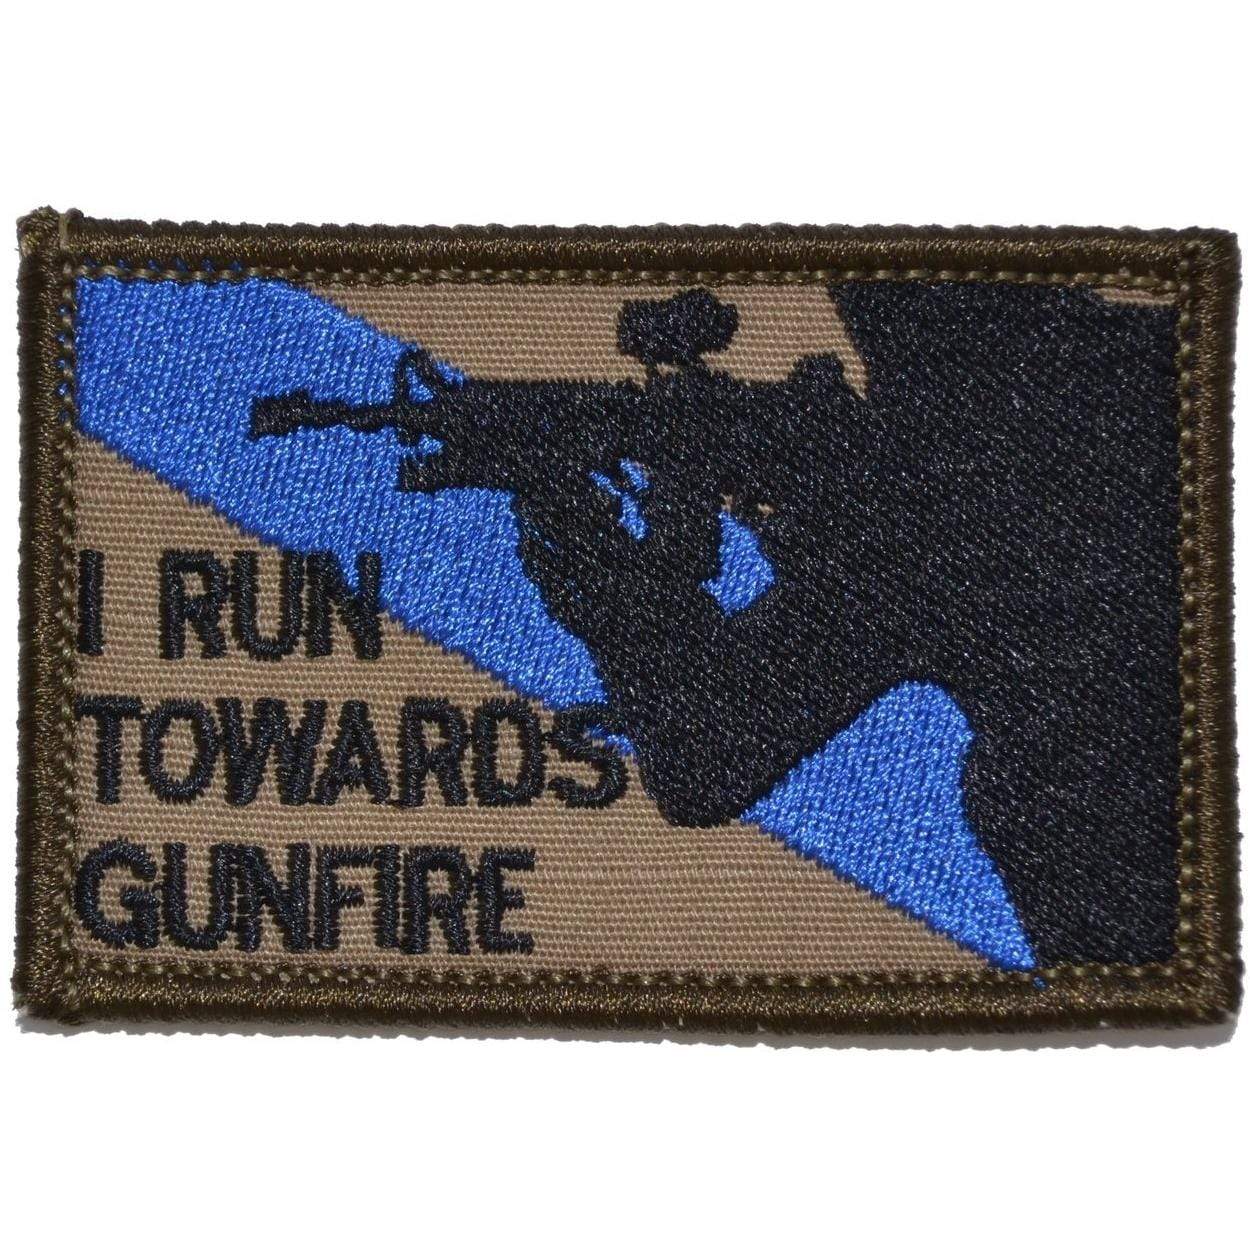 Tactical Gear Junkie Patches Coyote Brown w/ Black I Run Towards Gunfire - 2x3 Patch